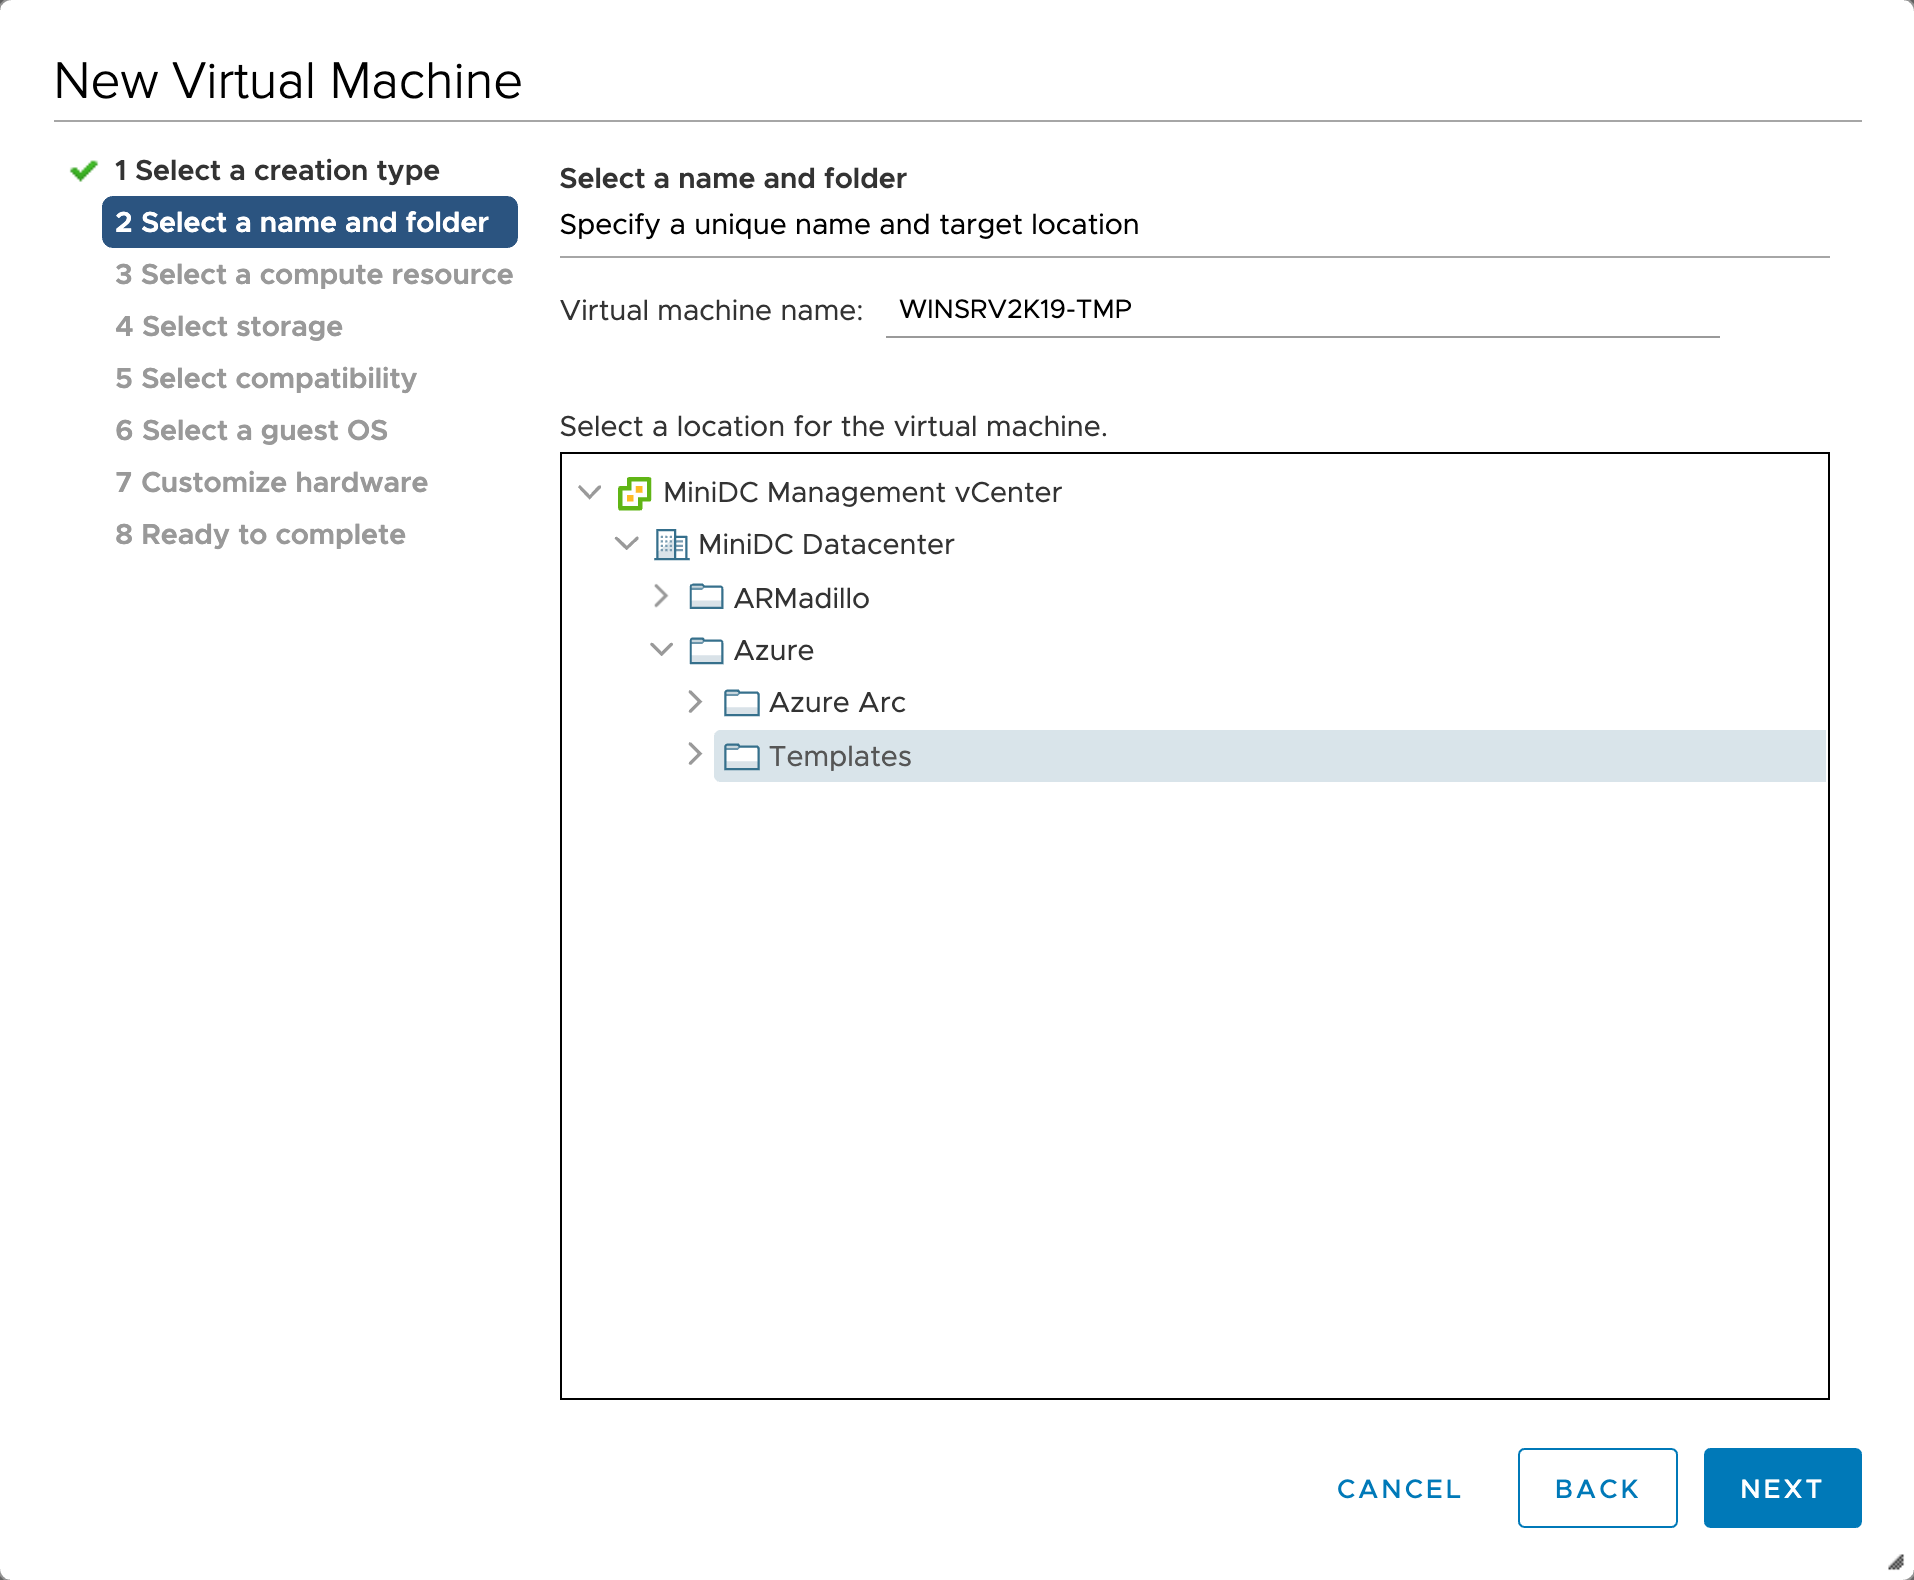 Screenshot of the "Select a name and folder" section of the New Virtual Machine creation pane.